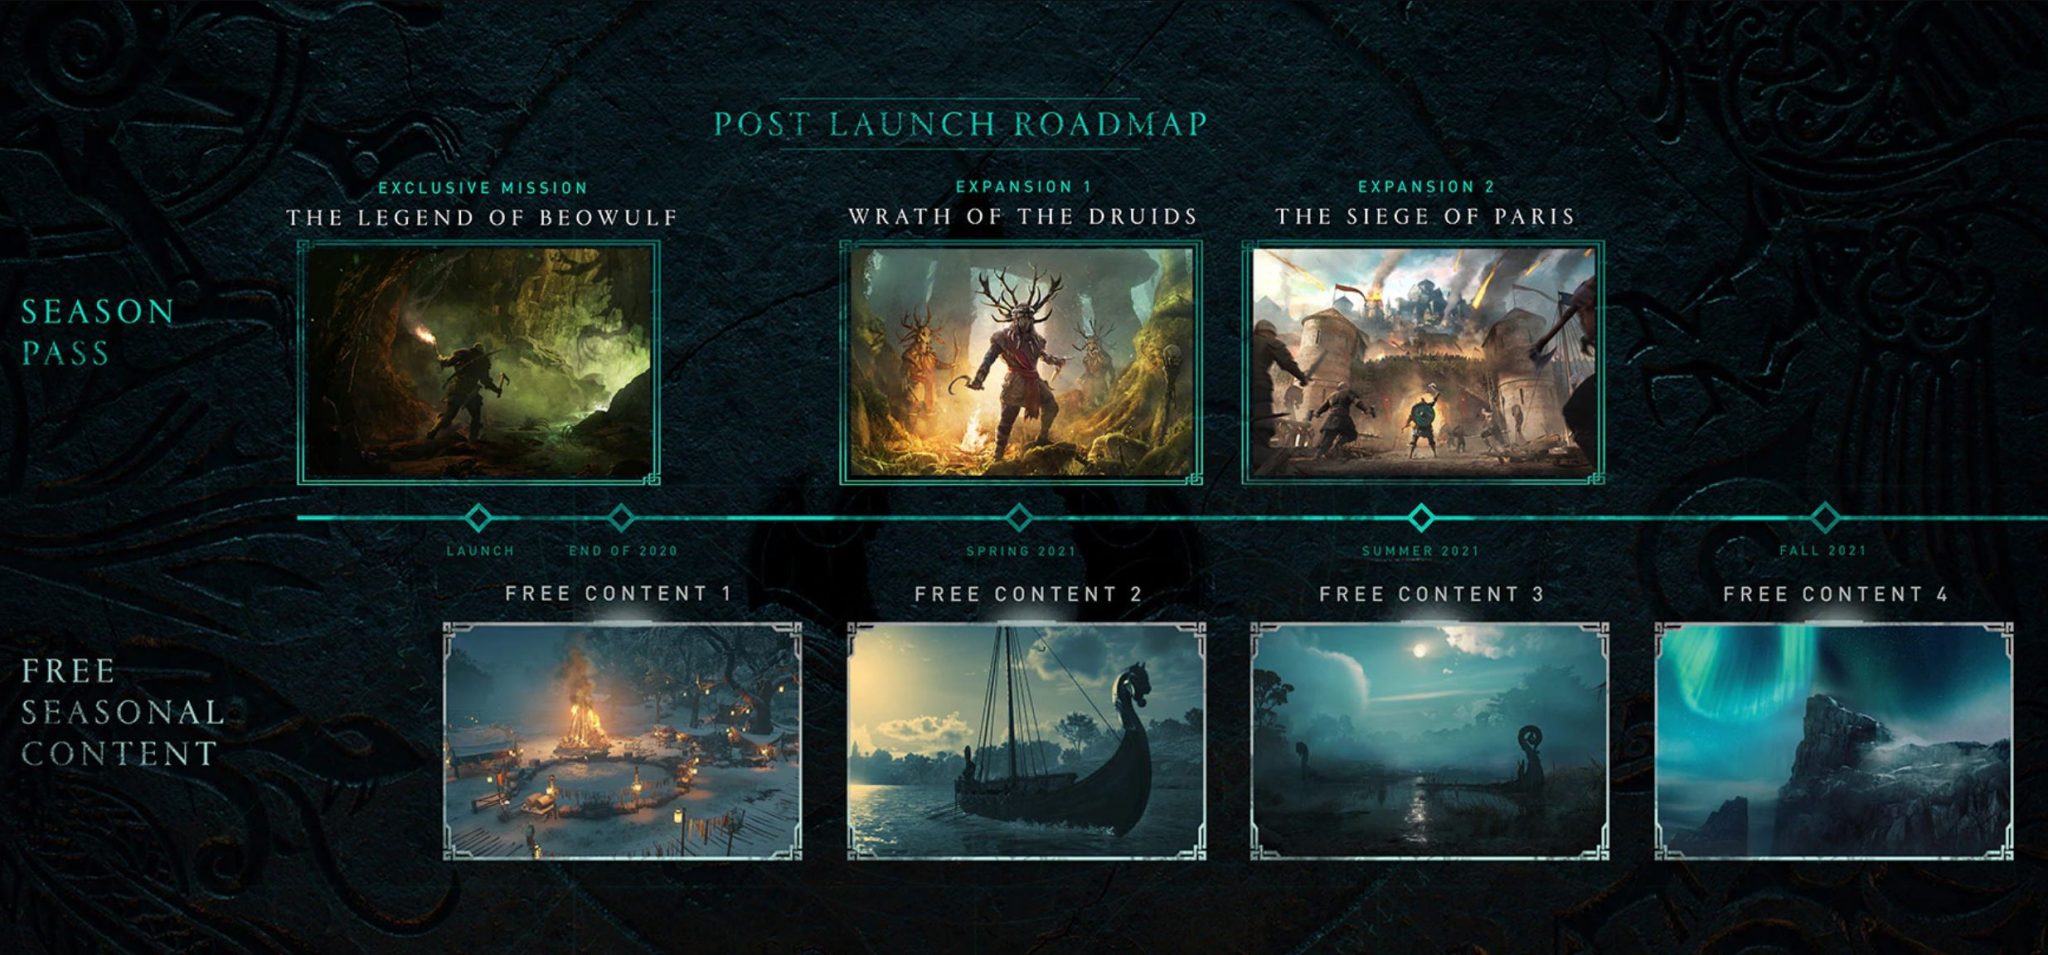 Assassins-Creed-Valhall-Post-Launch-Content-Roadmap-2048x955.jpg